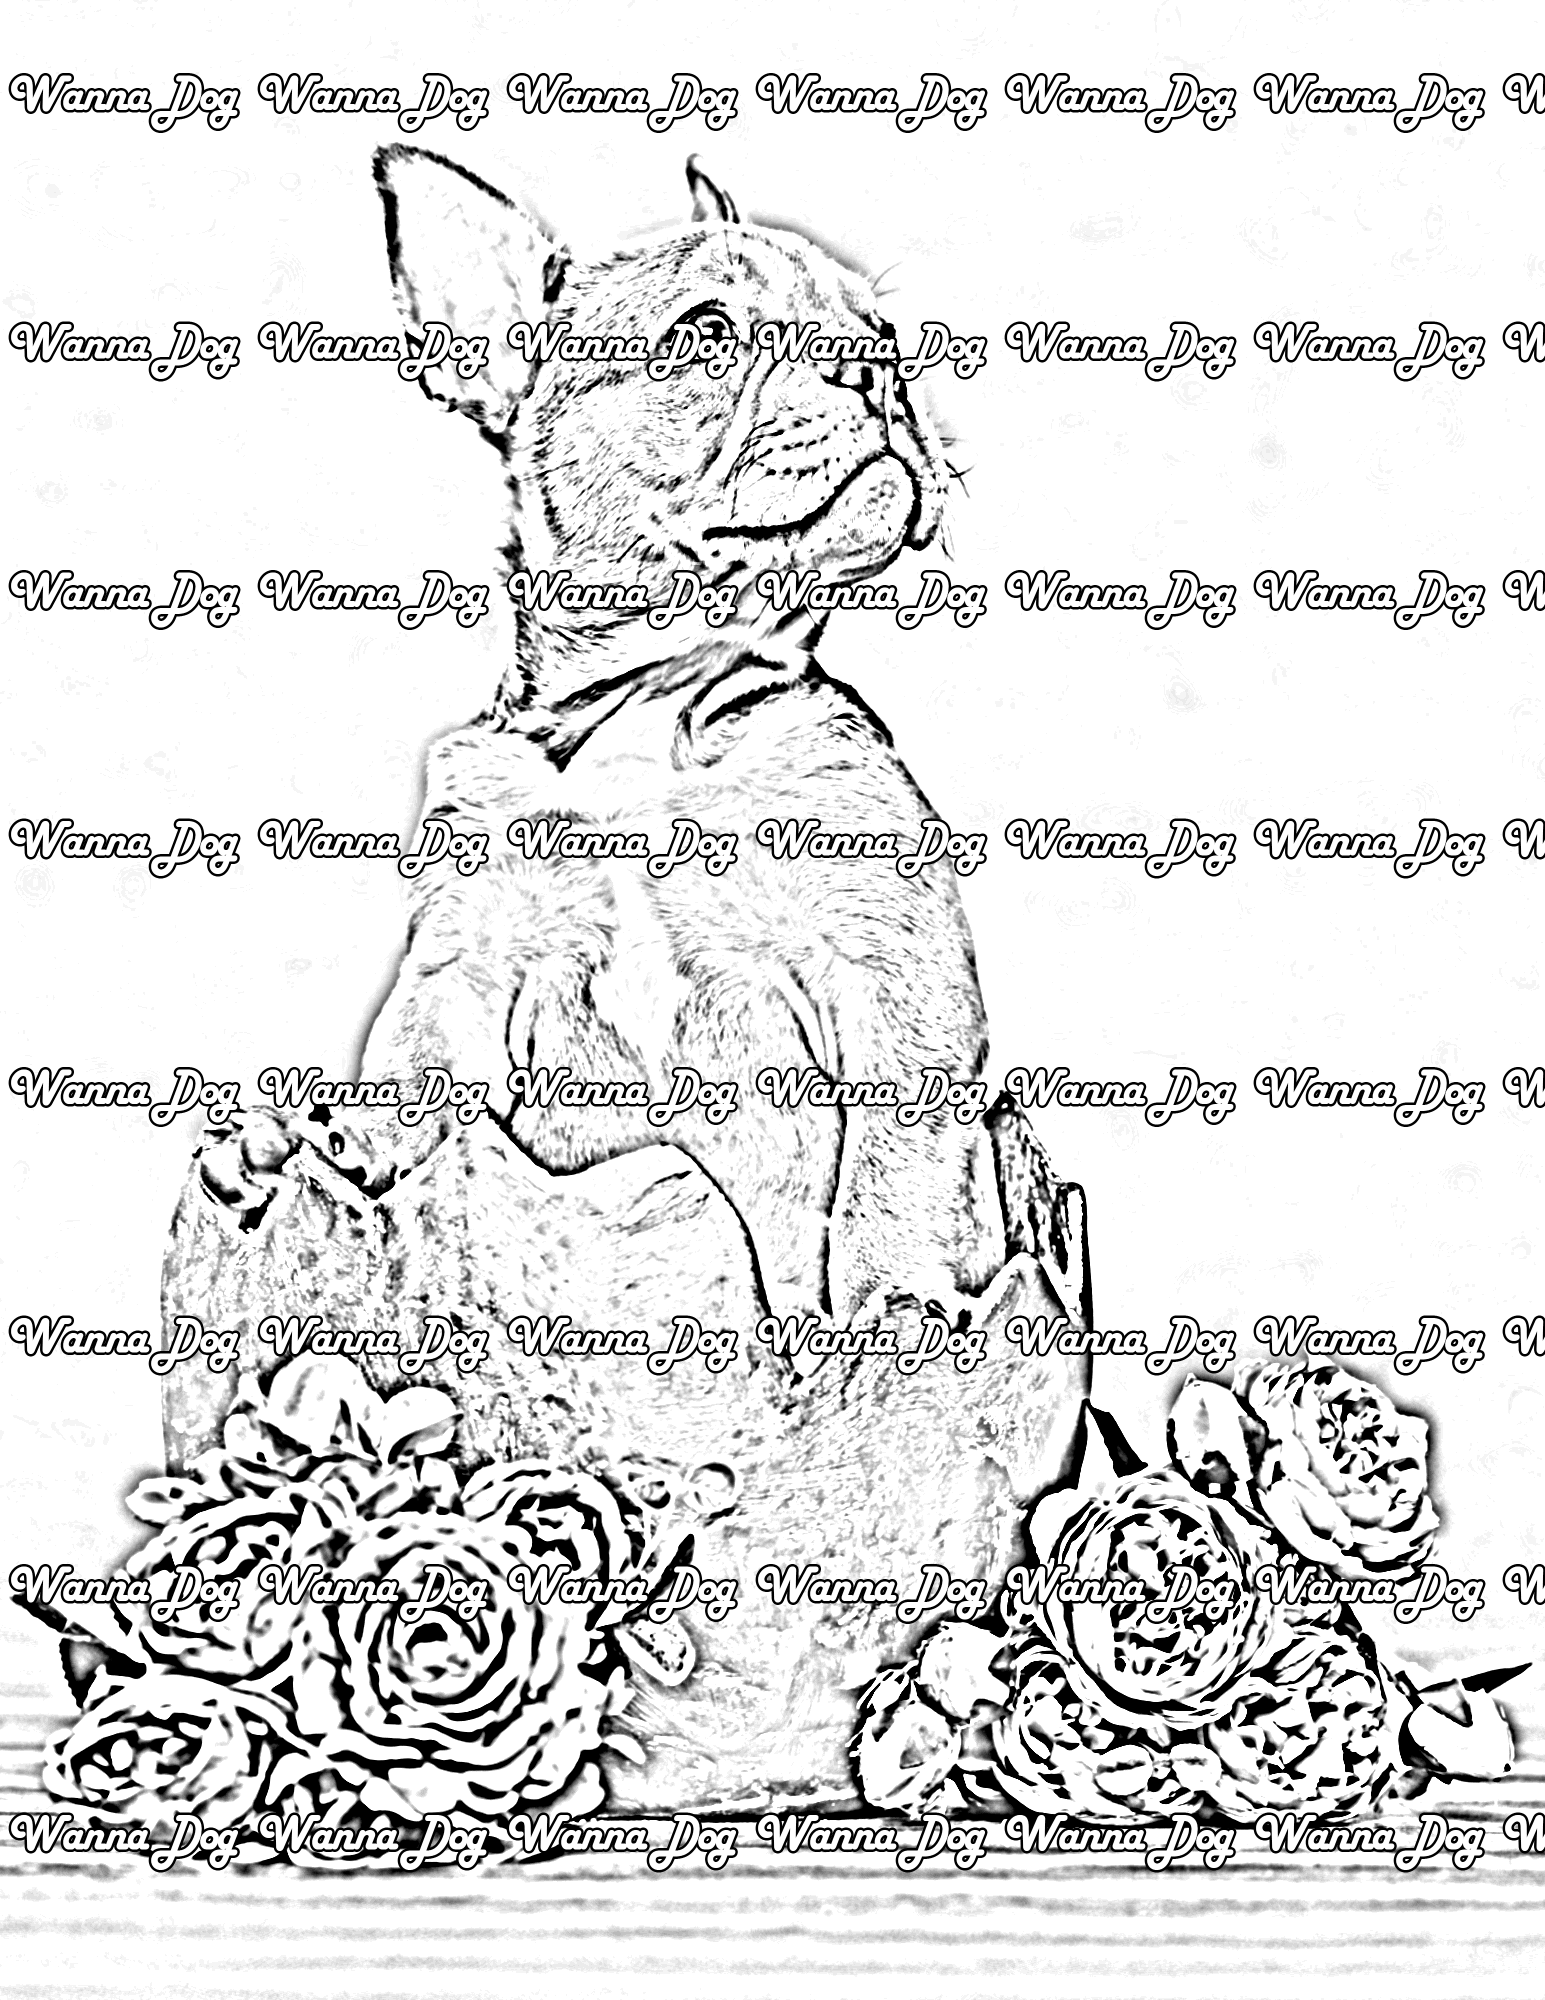 French Bulldog Puppy Coloring Page of a French Bulldog Puppy sitting with flowers